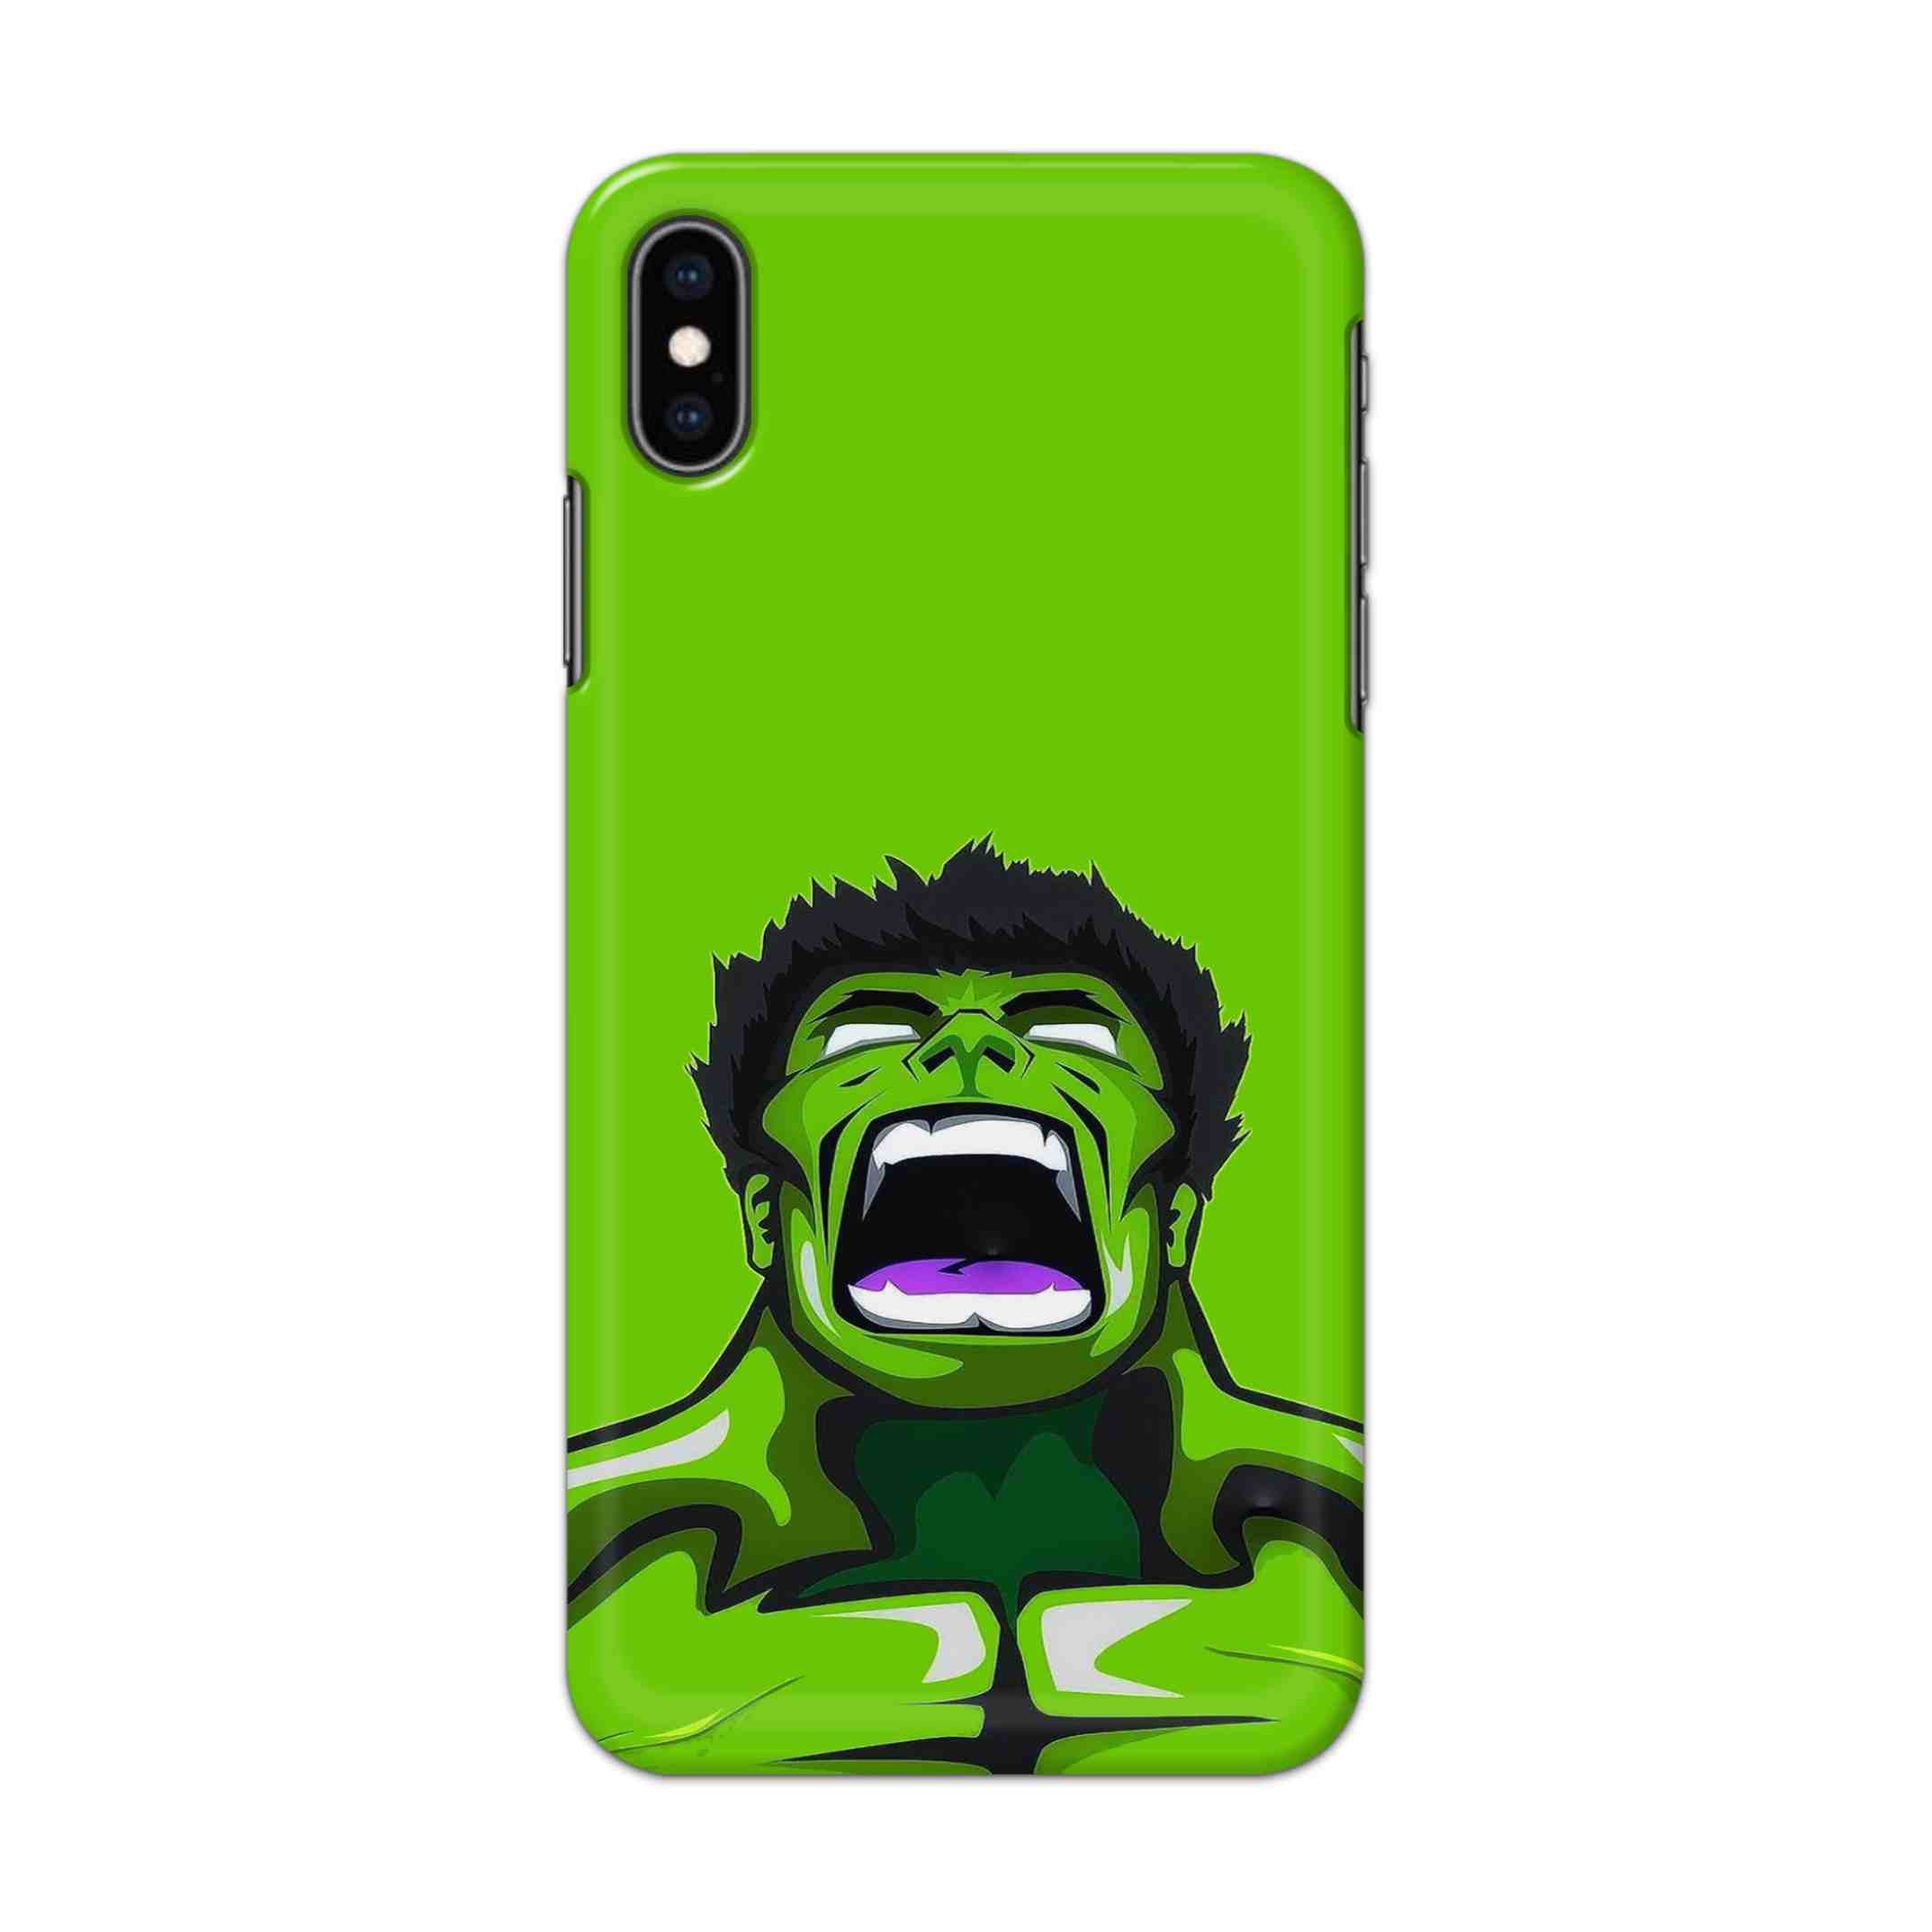 Buy Green Hulk Hard Back Mobile Phone Case/Cover For iPhone XS MAX Online